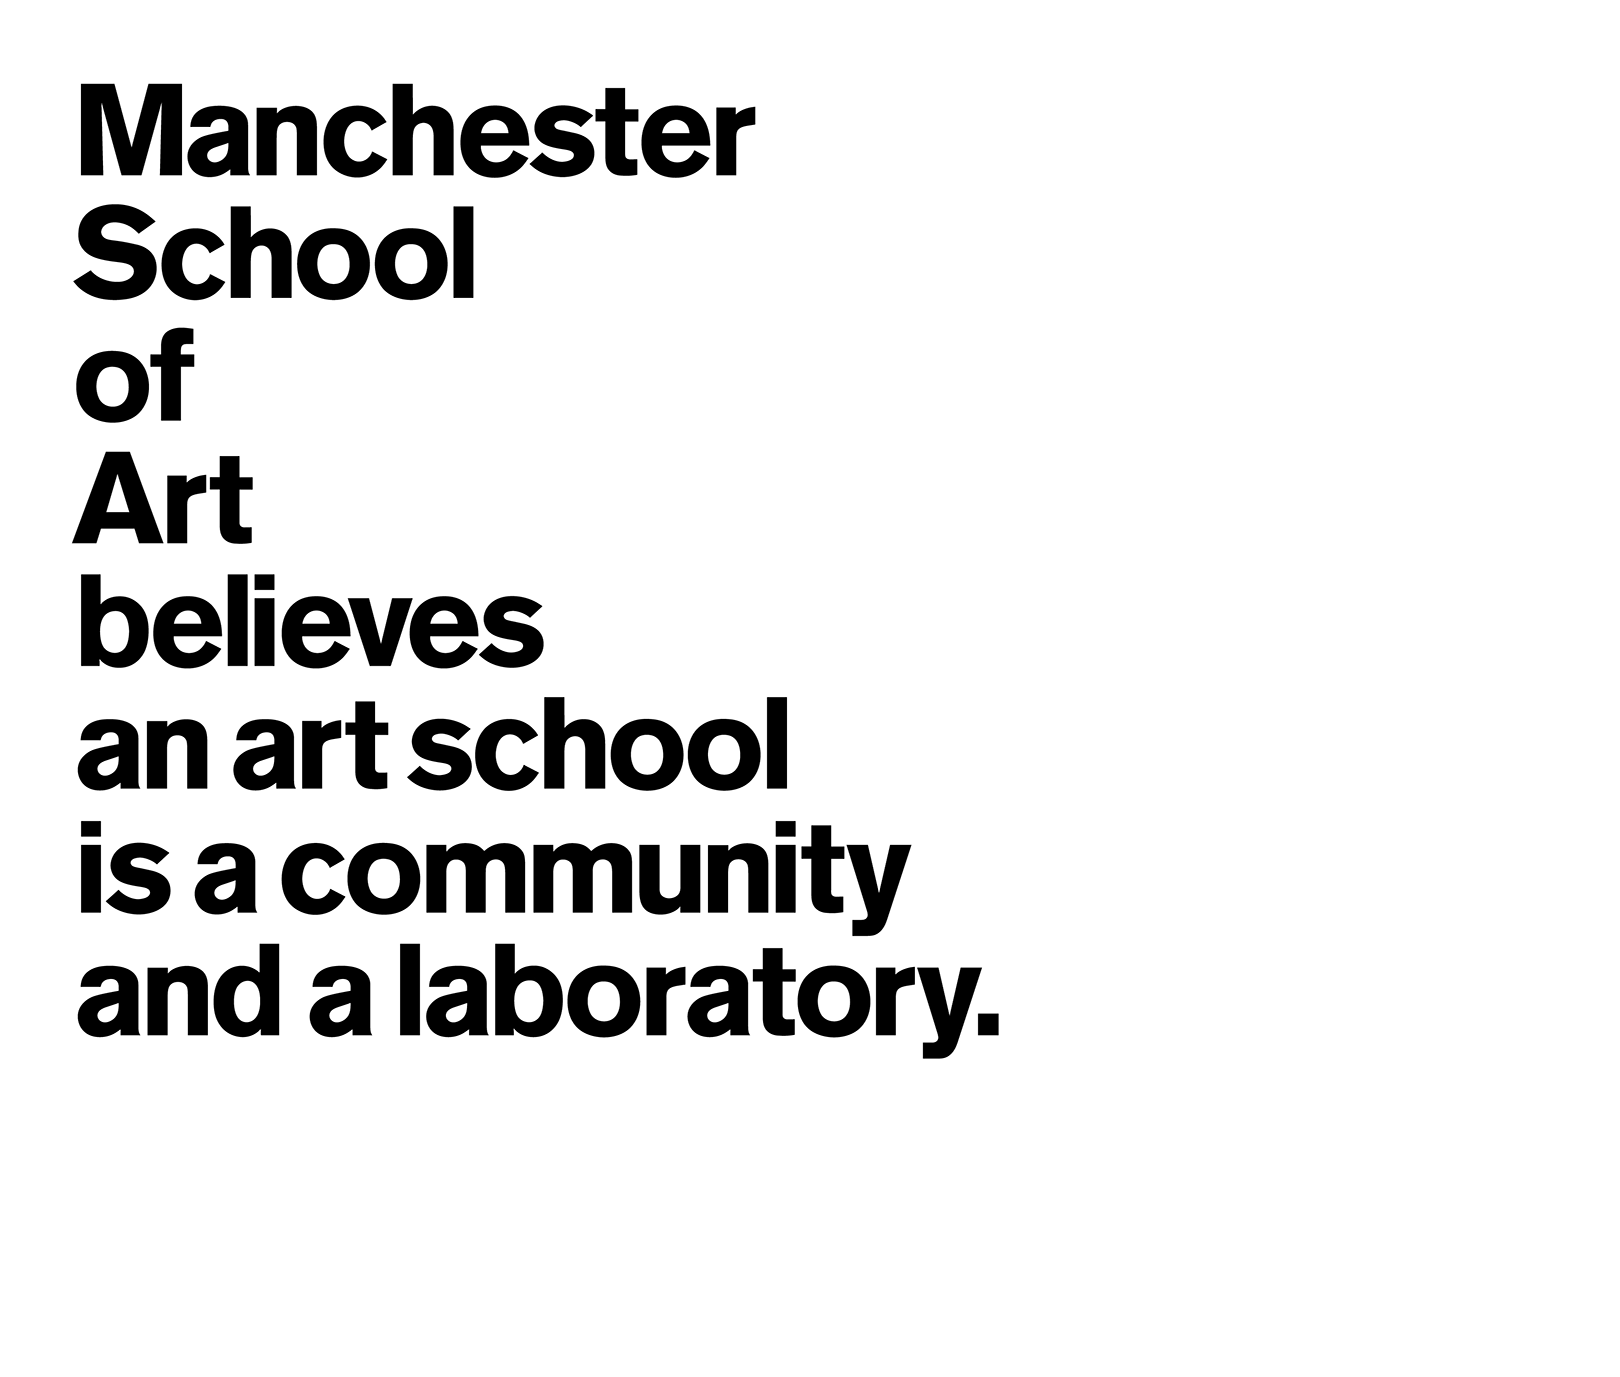 Manchester School of Art believes an art school is a community and a laboratory.